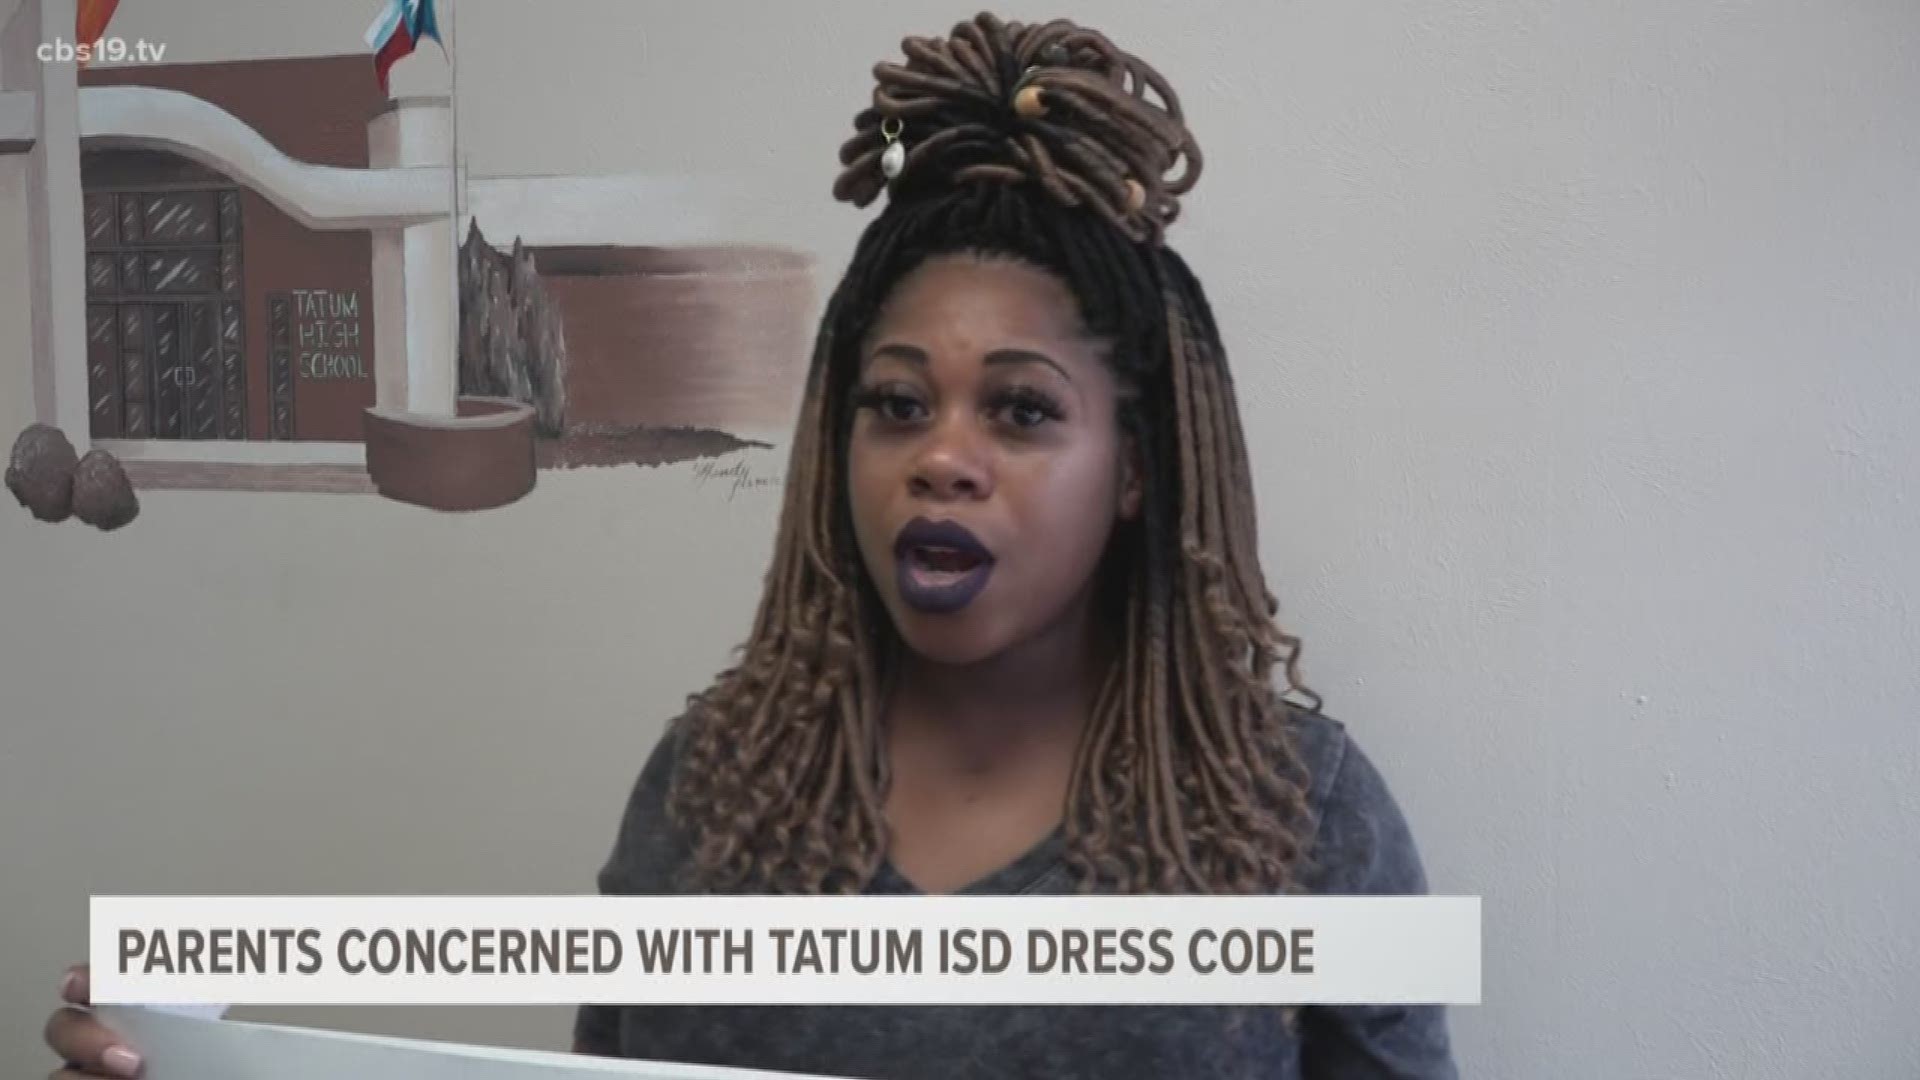 Some parents concerned with Tatum ISD dress code policy